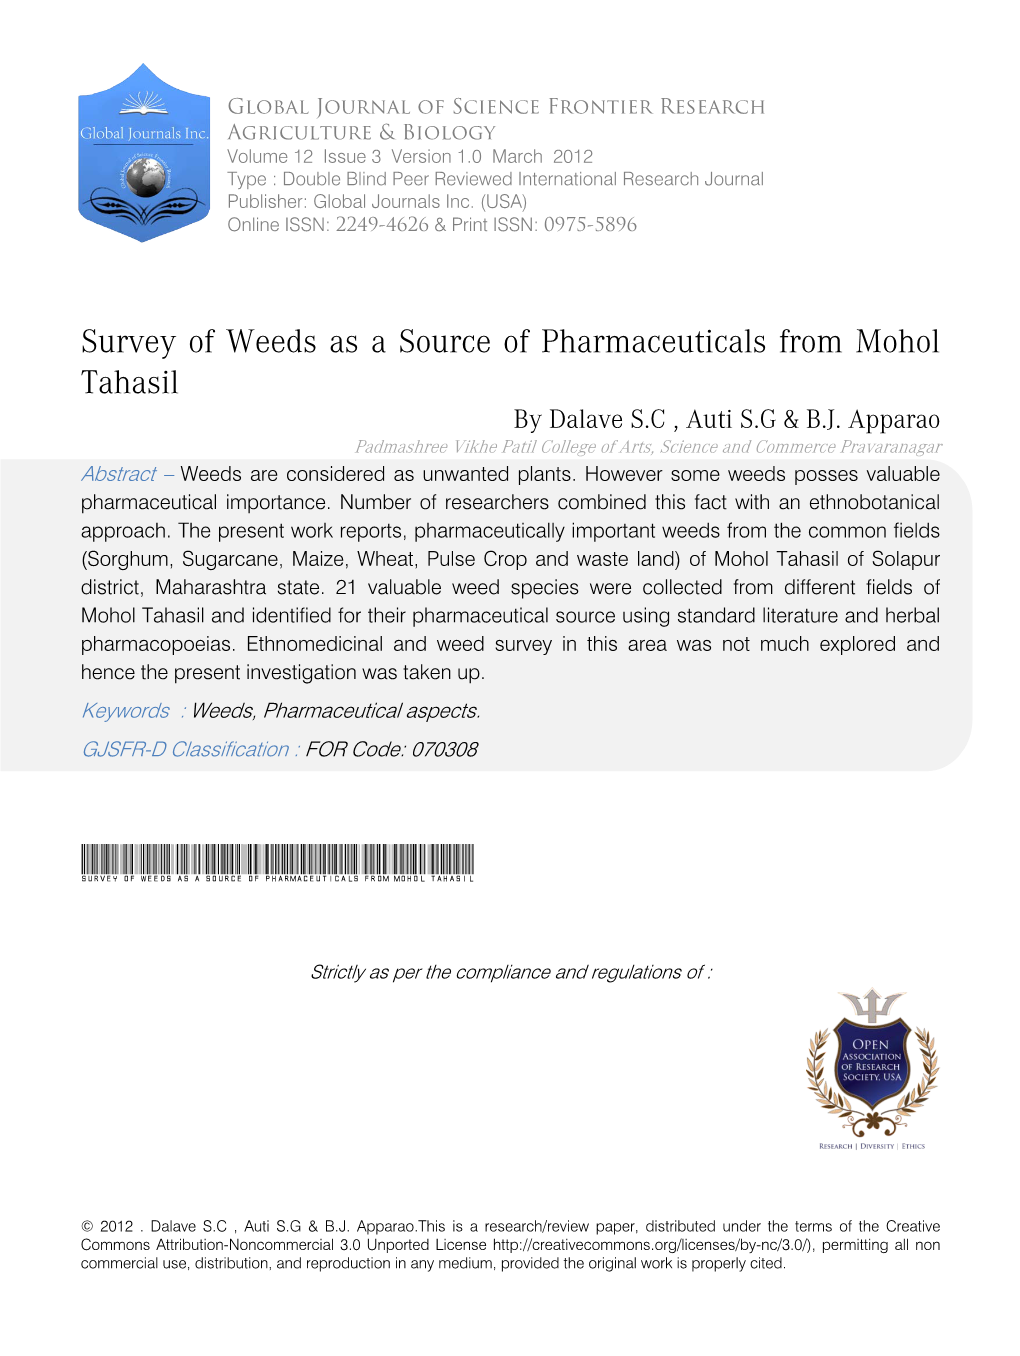 Survey of Weeds As a Source of Pharmaceuticals from Mohol Tahasil